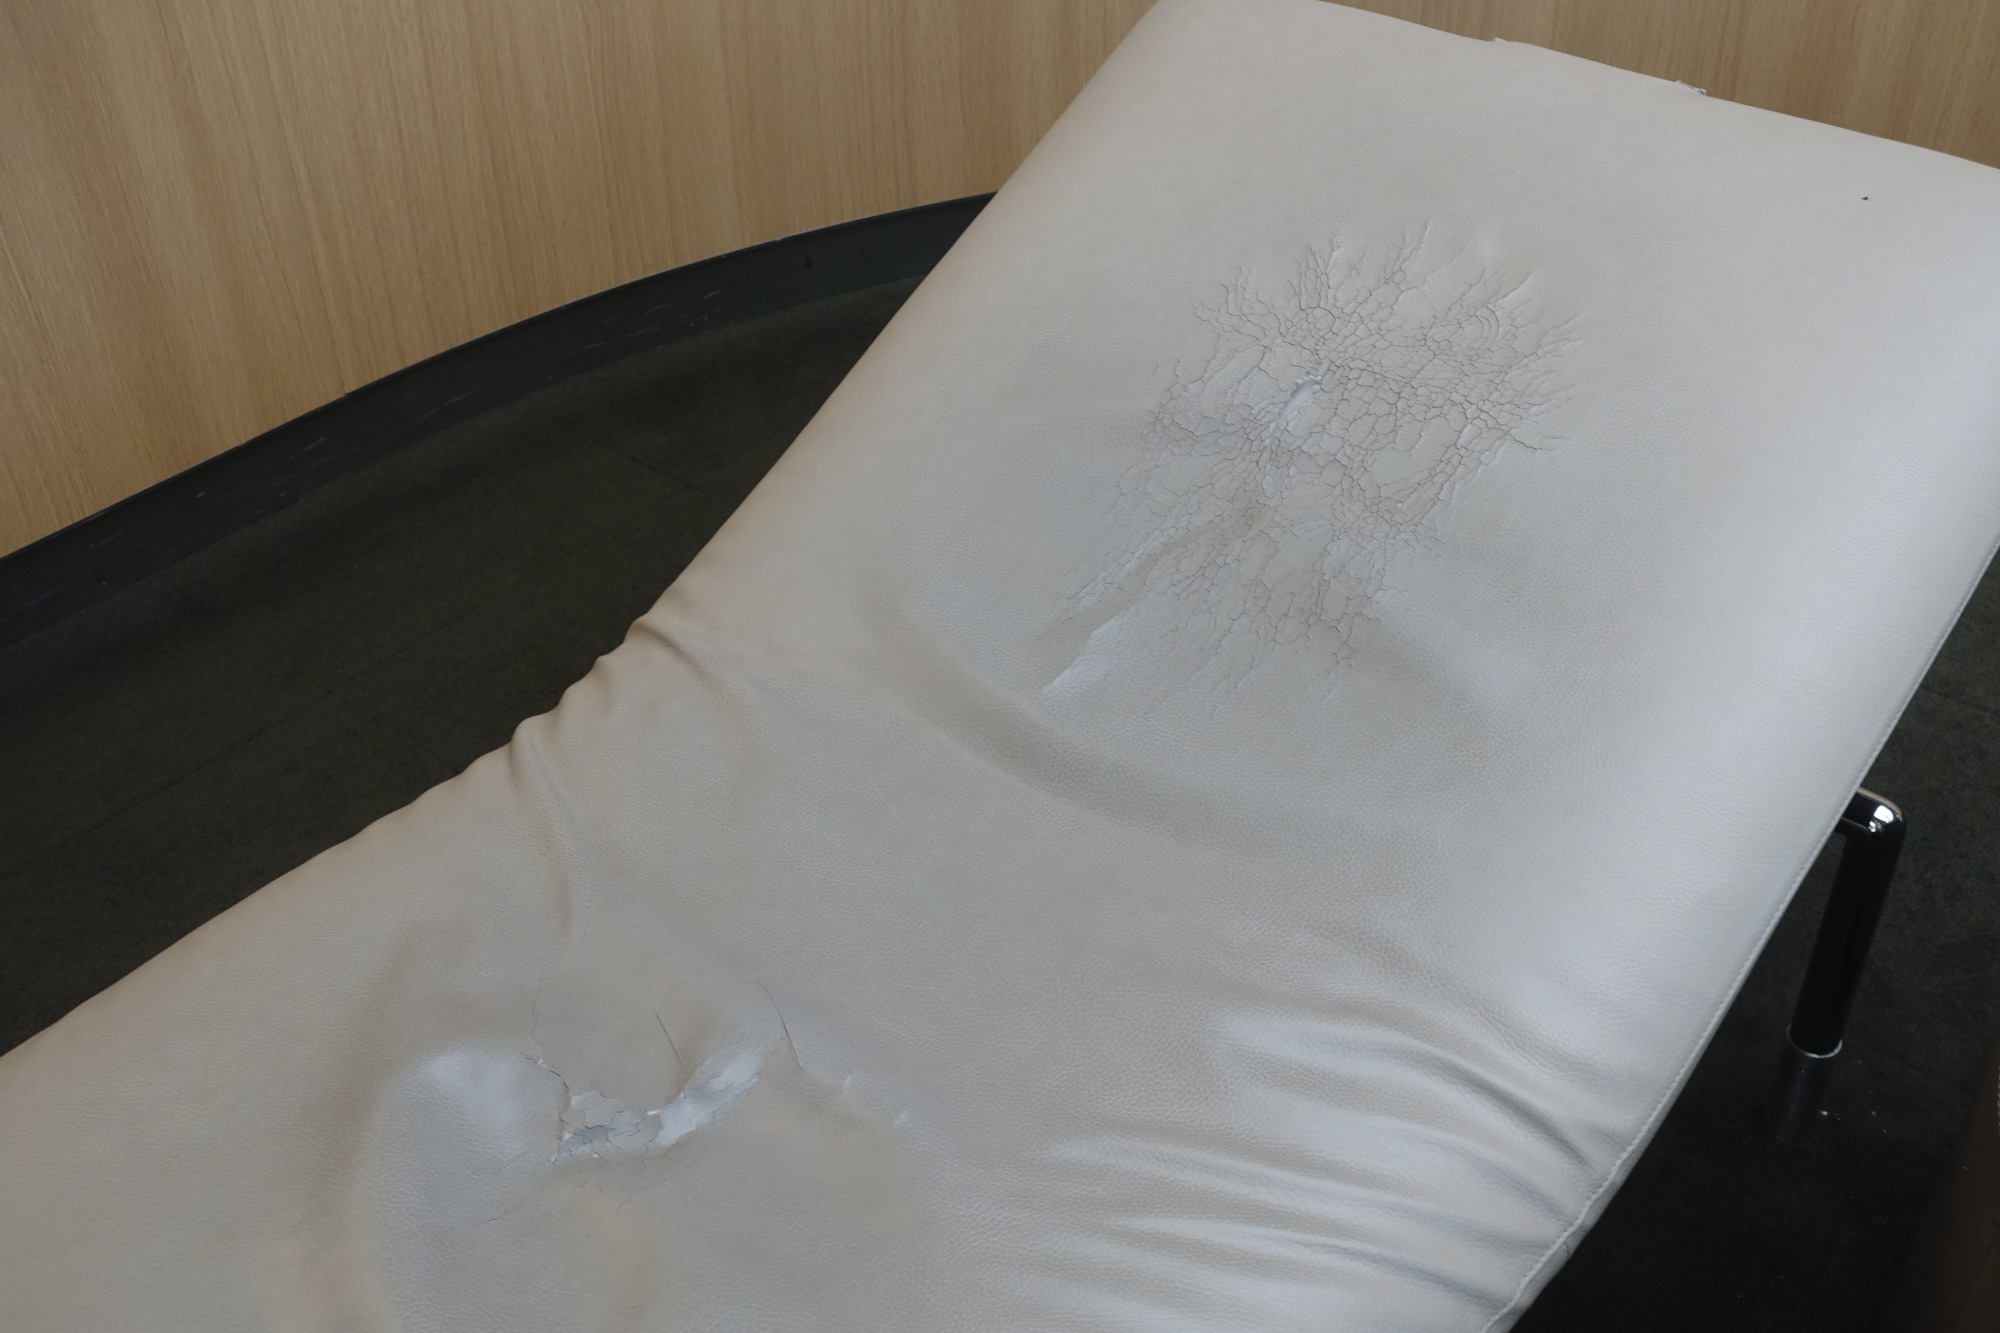 Cracked Surface of Lounger, Relaxation Area of Air France Lounge, Terminal 2E Hall M